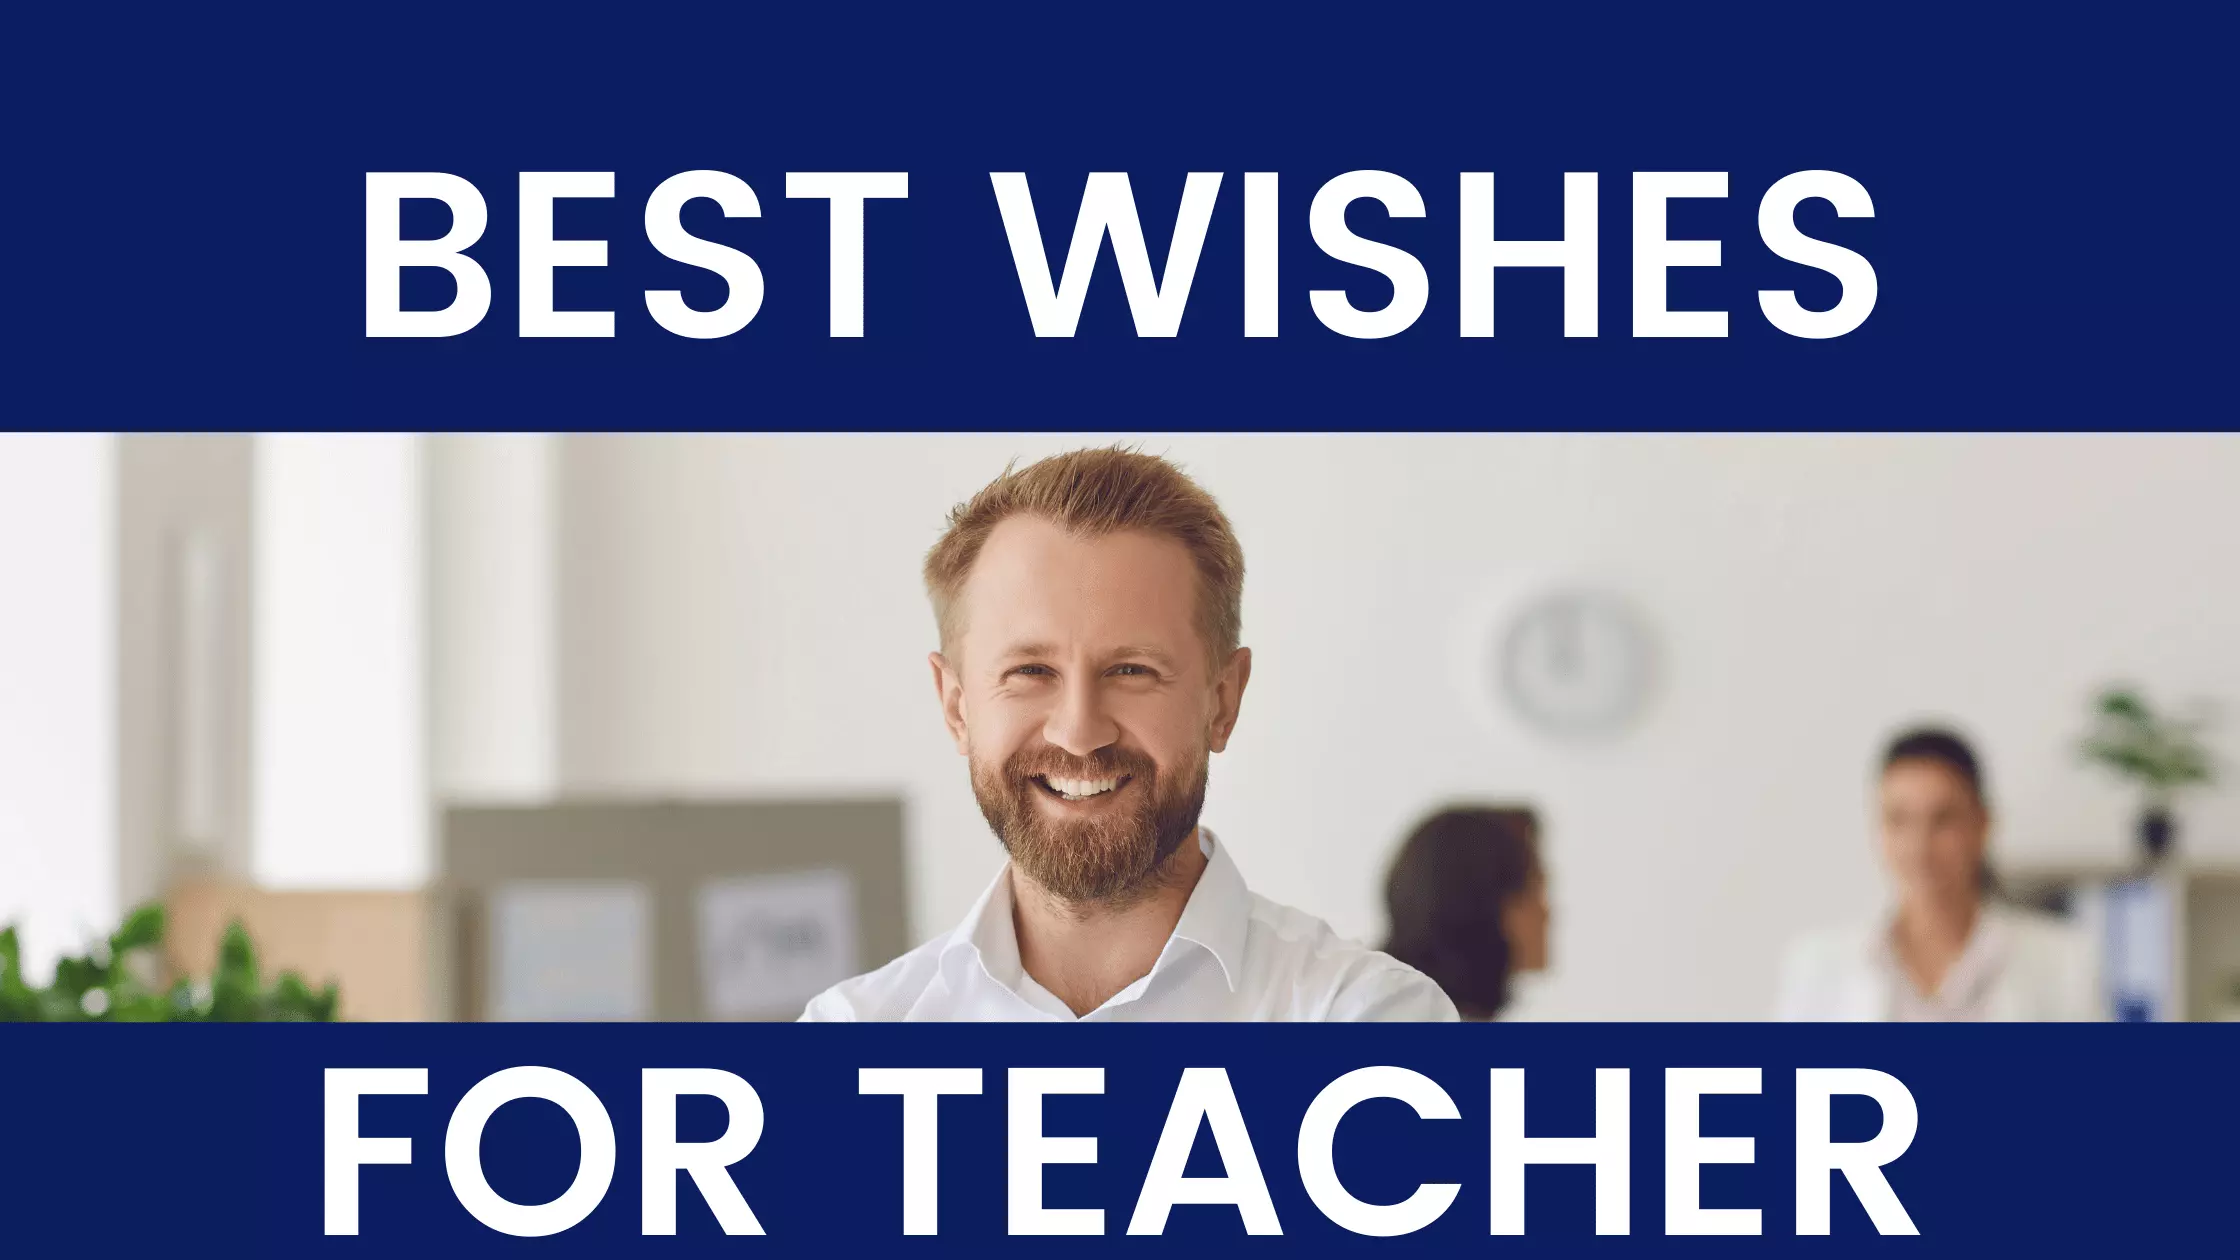 Best Wishes for Teacher - Ultimate List of Wishes for Wishing our Teachers